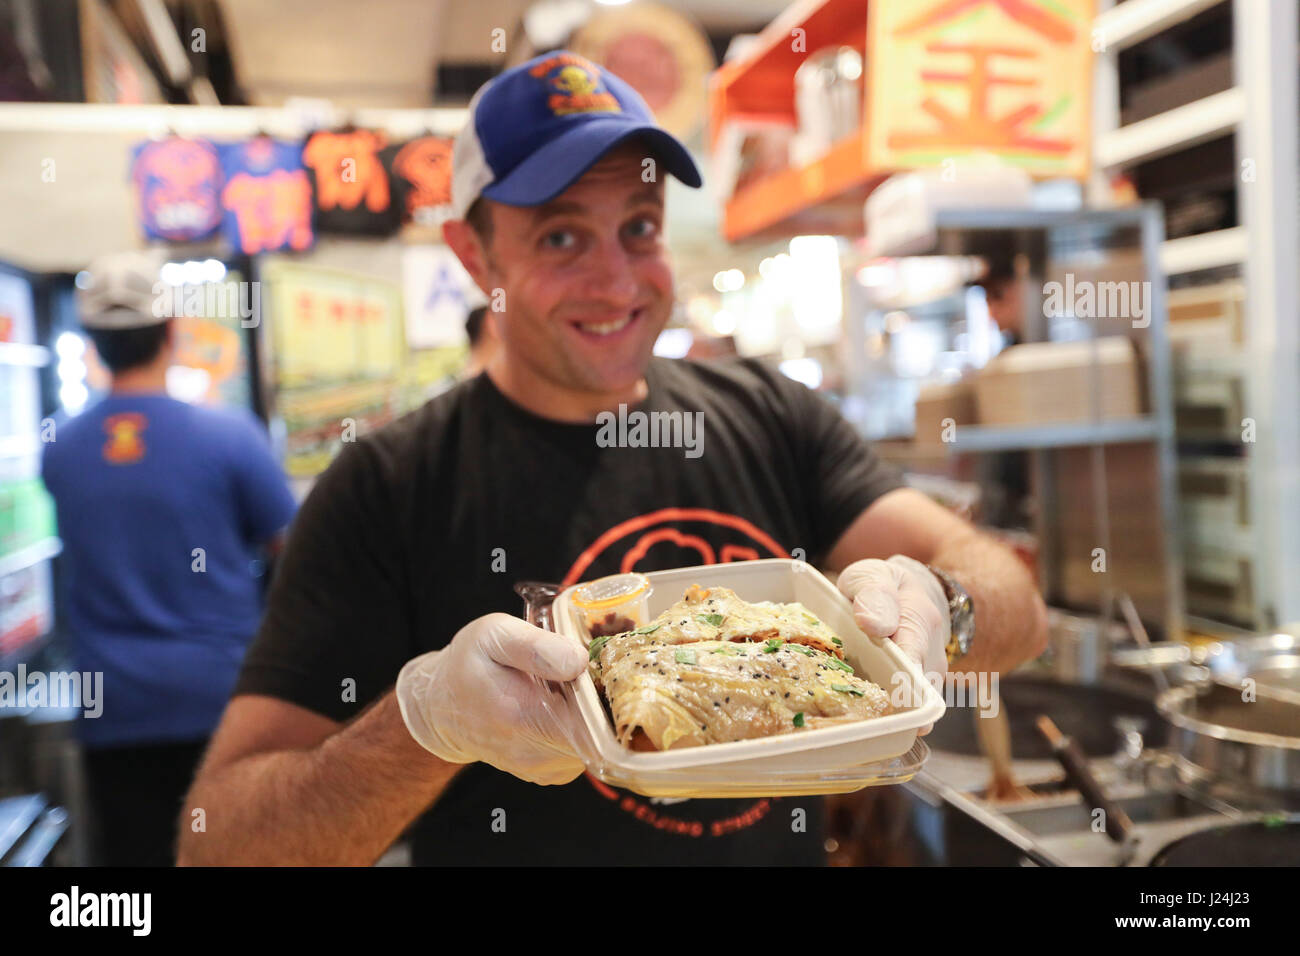 New York, USA. 25th Apr, 2017. Brian Goldberg shows a Jianbing at the kiosk of Mr. Bing in UrbanSpace food court in New York, the United States, April 17, 2017. UrbanSpace in midtown New York is a place white-collars come for lunch during their workdays. For the past a few months, customers have always lined up before a kiosk under a banner with Chinese characters. What this kiosk sells is a very authentic Chinese food in north China -- Jianbing, or the Chinese crepe. Credit: Xinhua/Alamy Live News Stock Photo